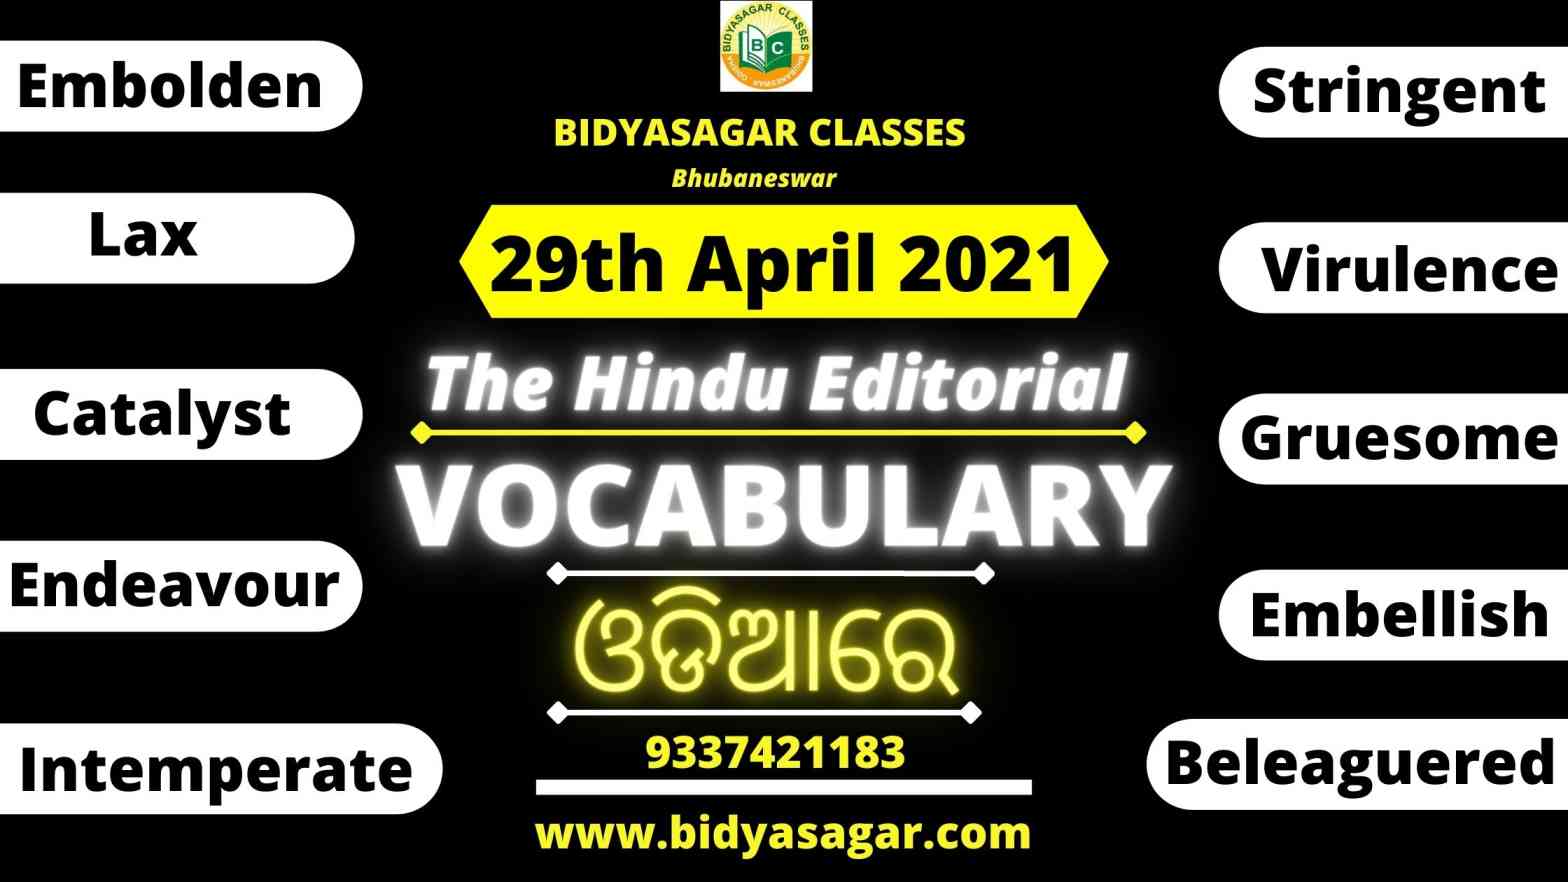 The Hindu Editorial Vocabulary of 29th April 2021